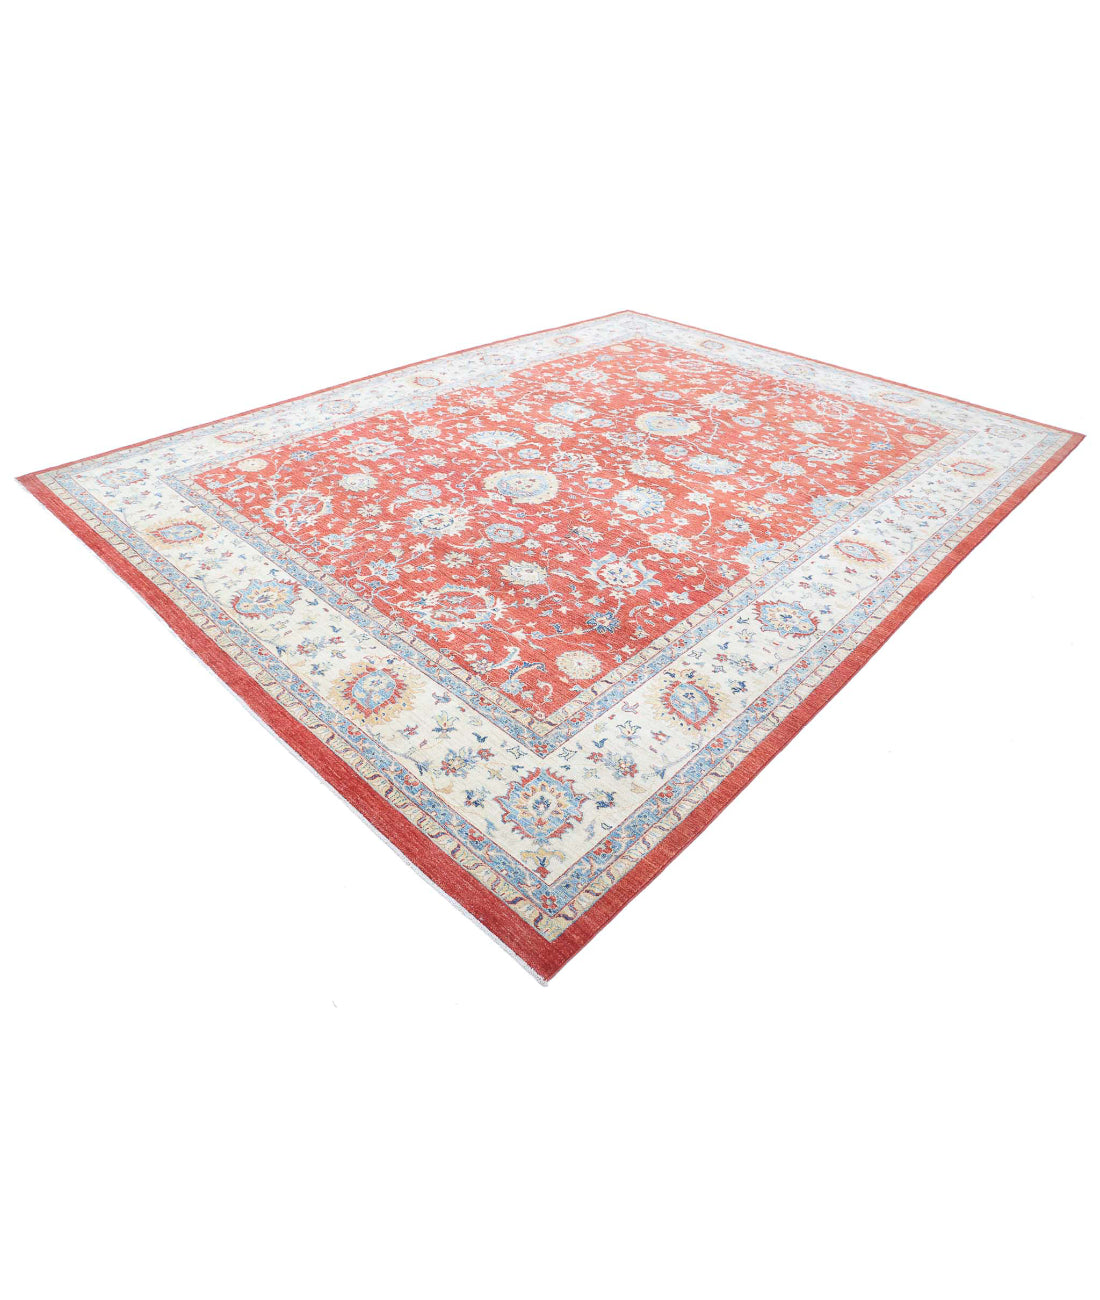 Ziegler 9'11'' X 13'2'' Hand-Knotted Wool Rug 9'11'' x 13'2'' (298 X 395) / Red / Ivory